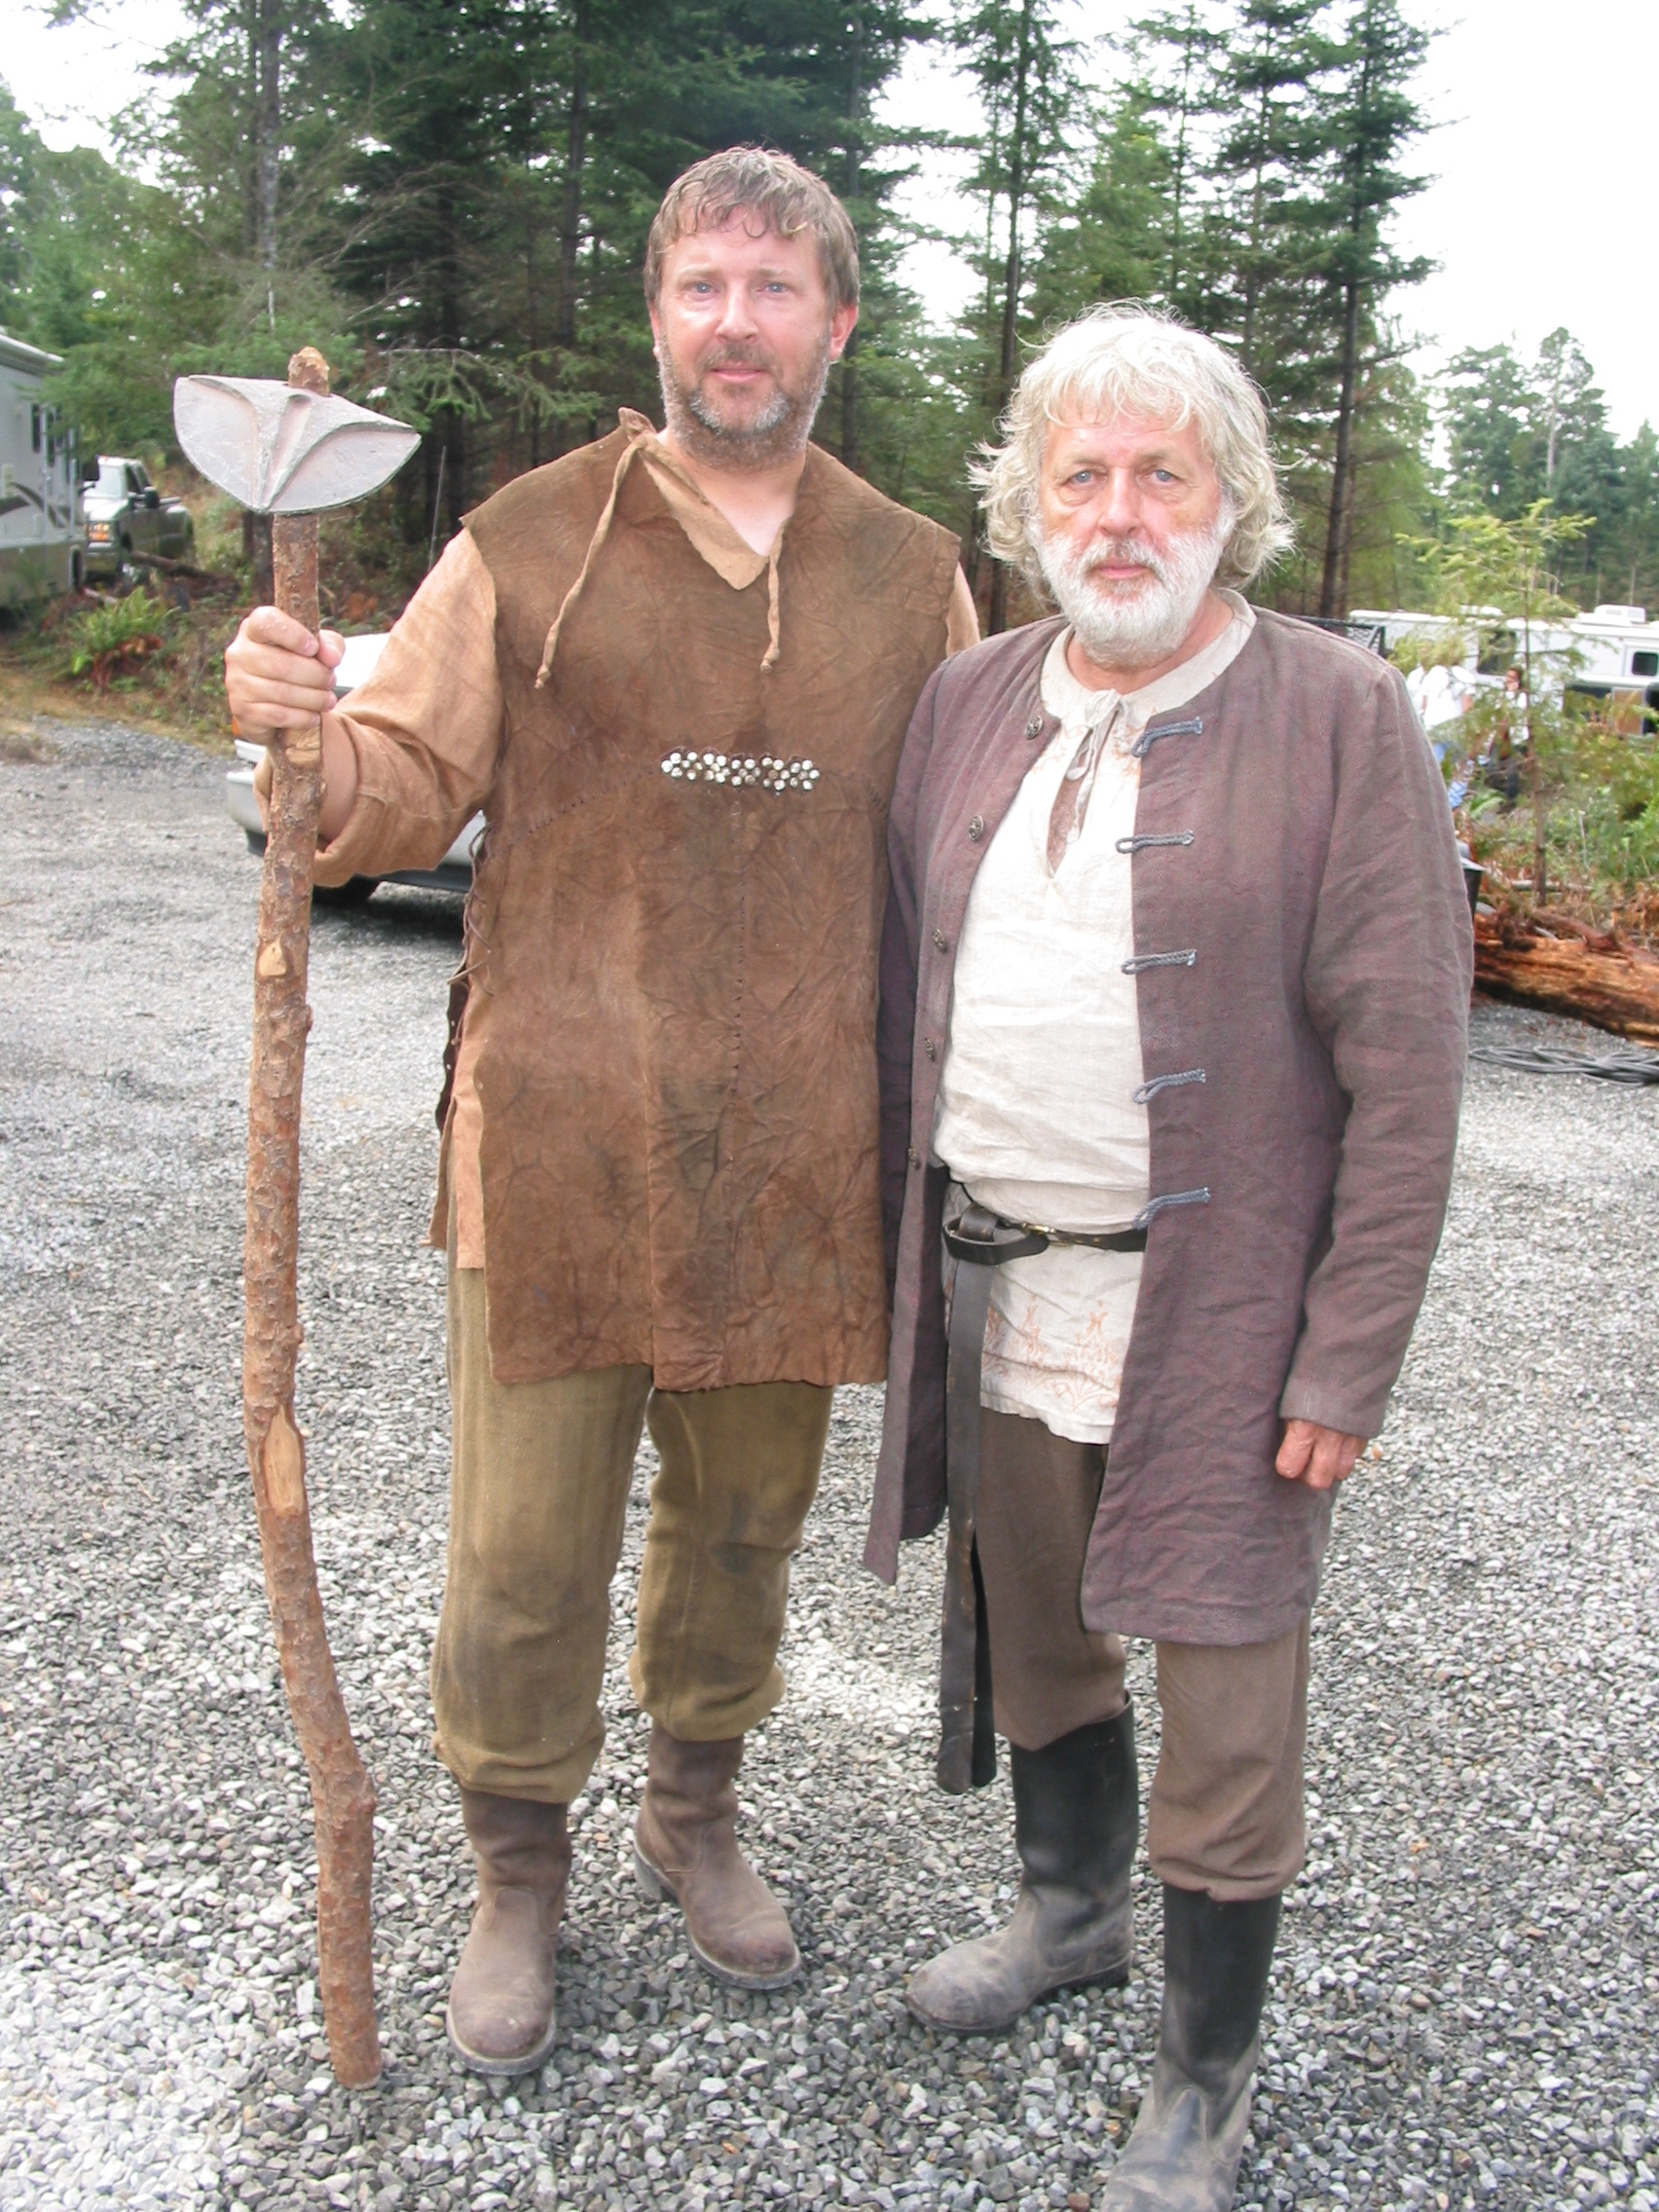 Christian J. Stewart (left) and Edwin Turner (right) on the set of 